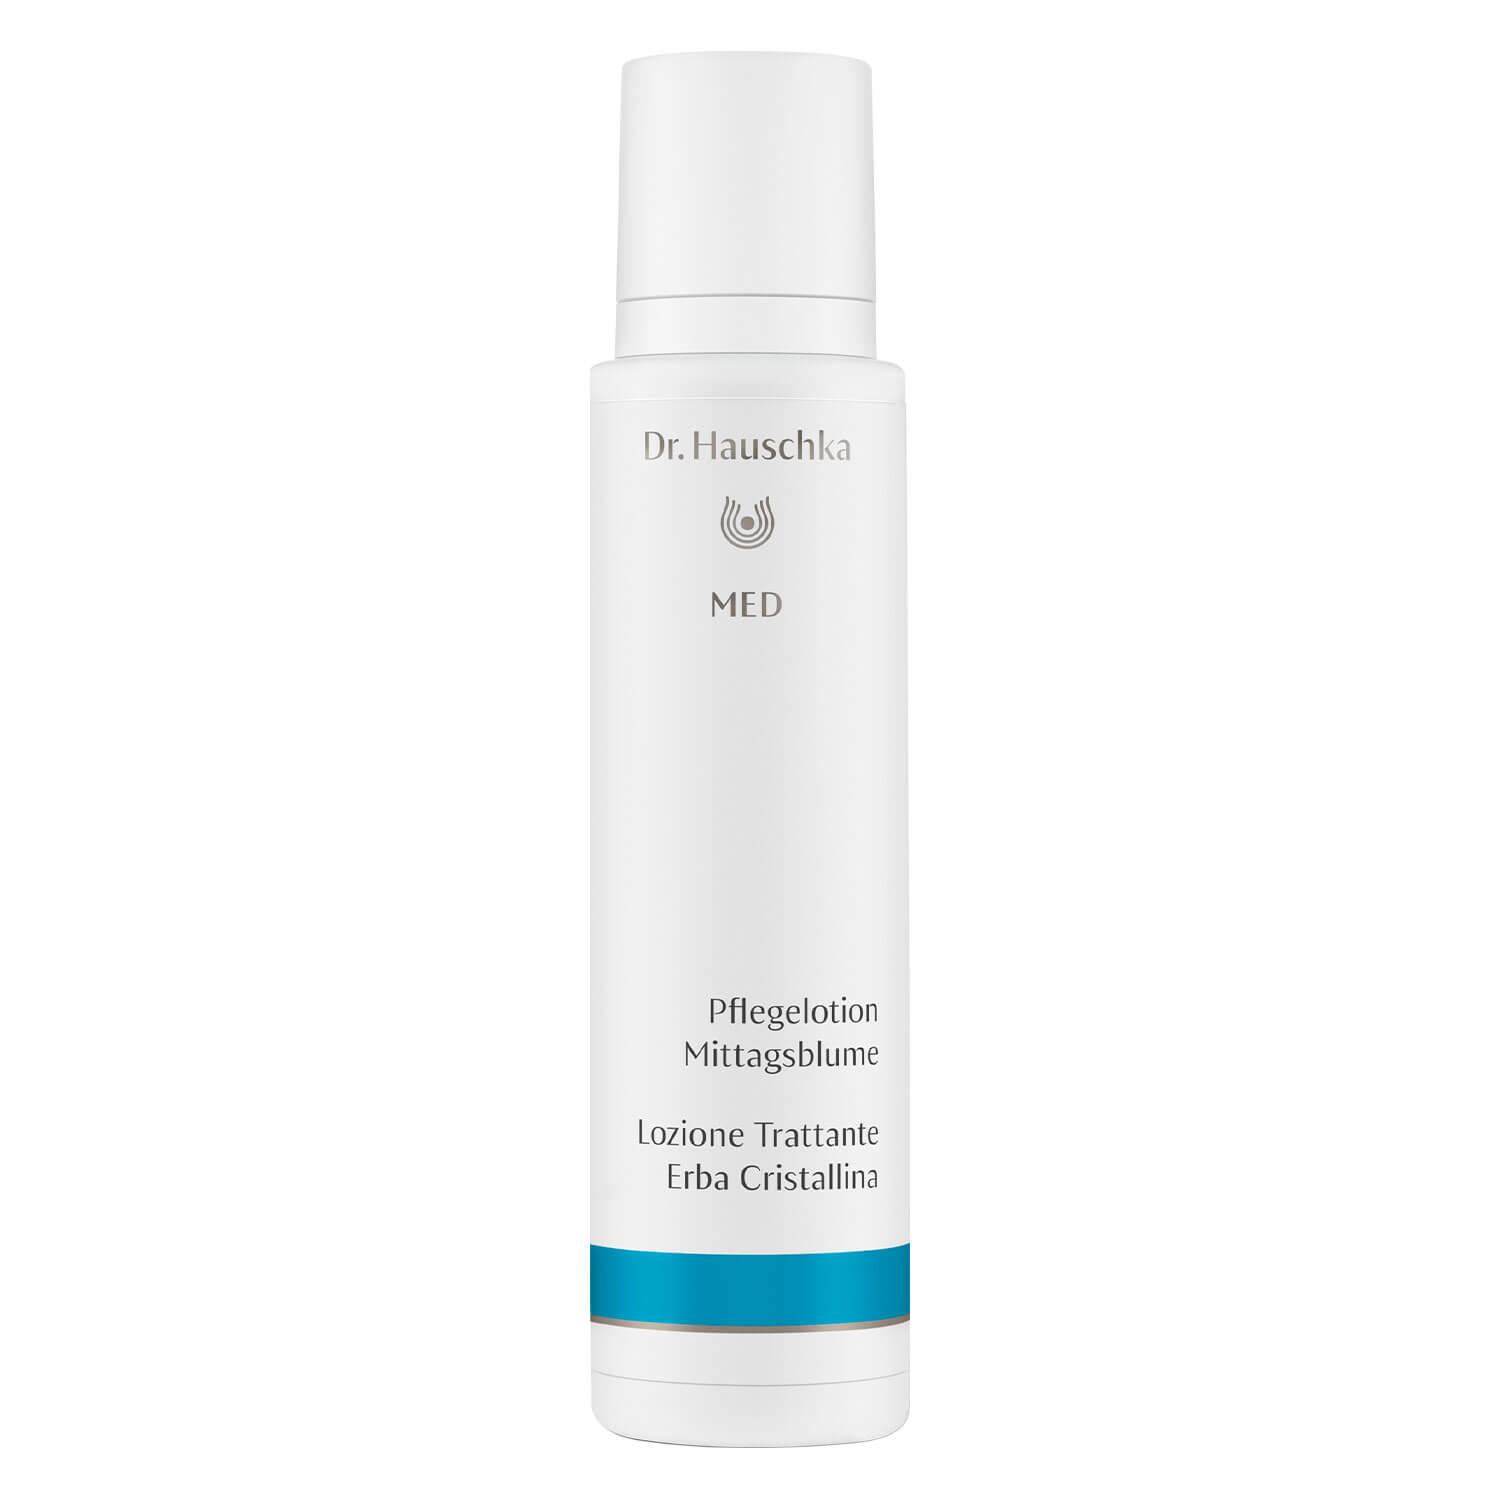 Dr. Hauschka MED -  Ice Plant Body Care Lotion